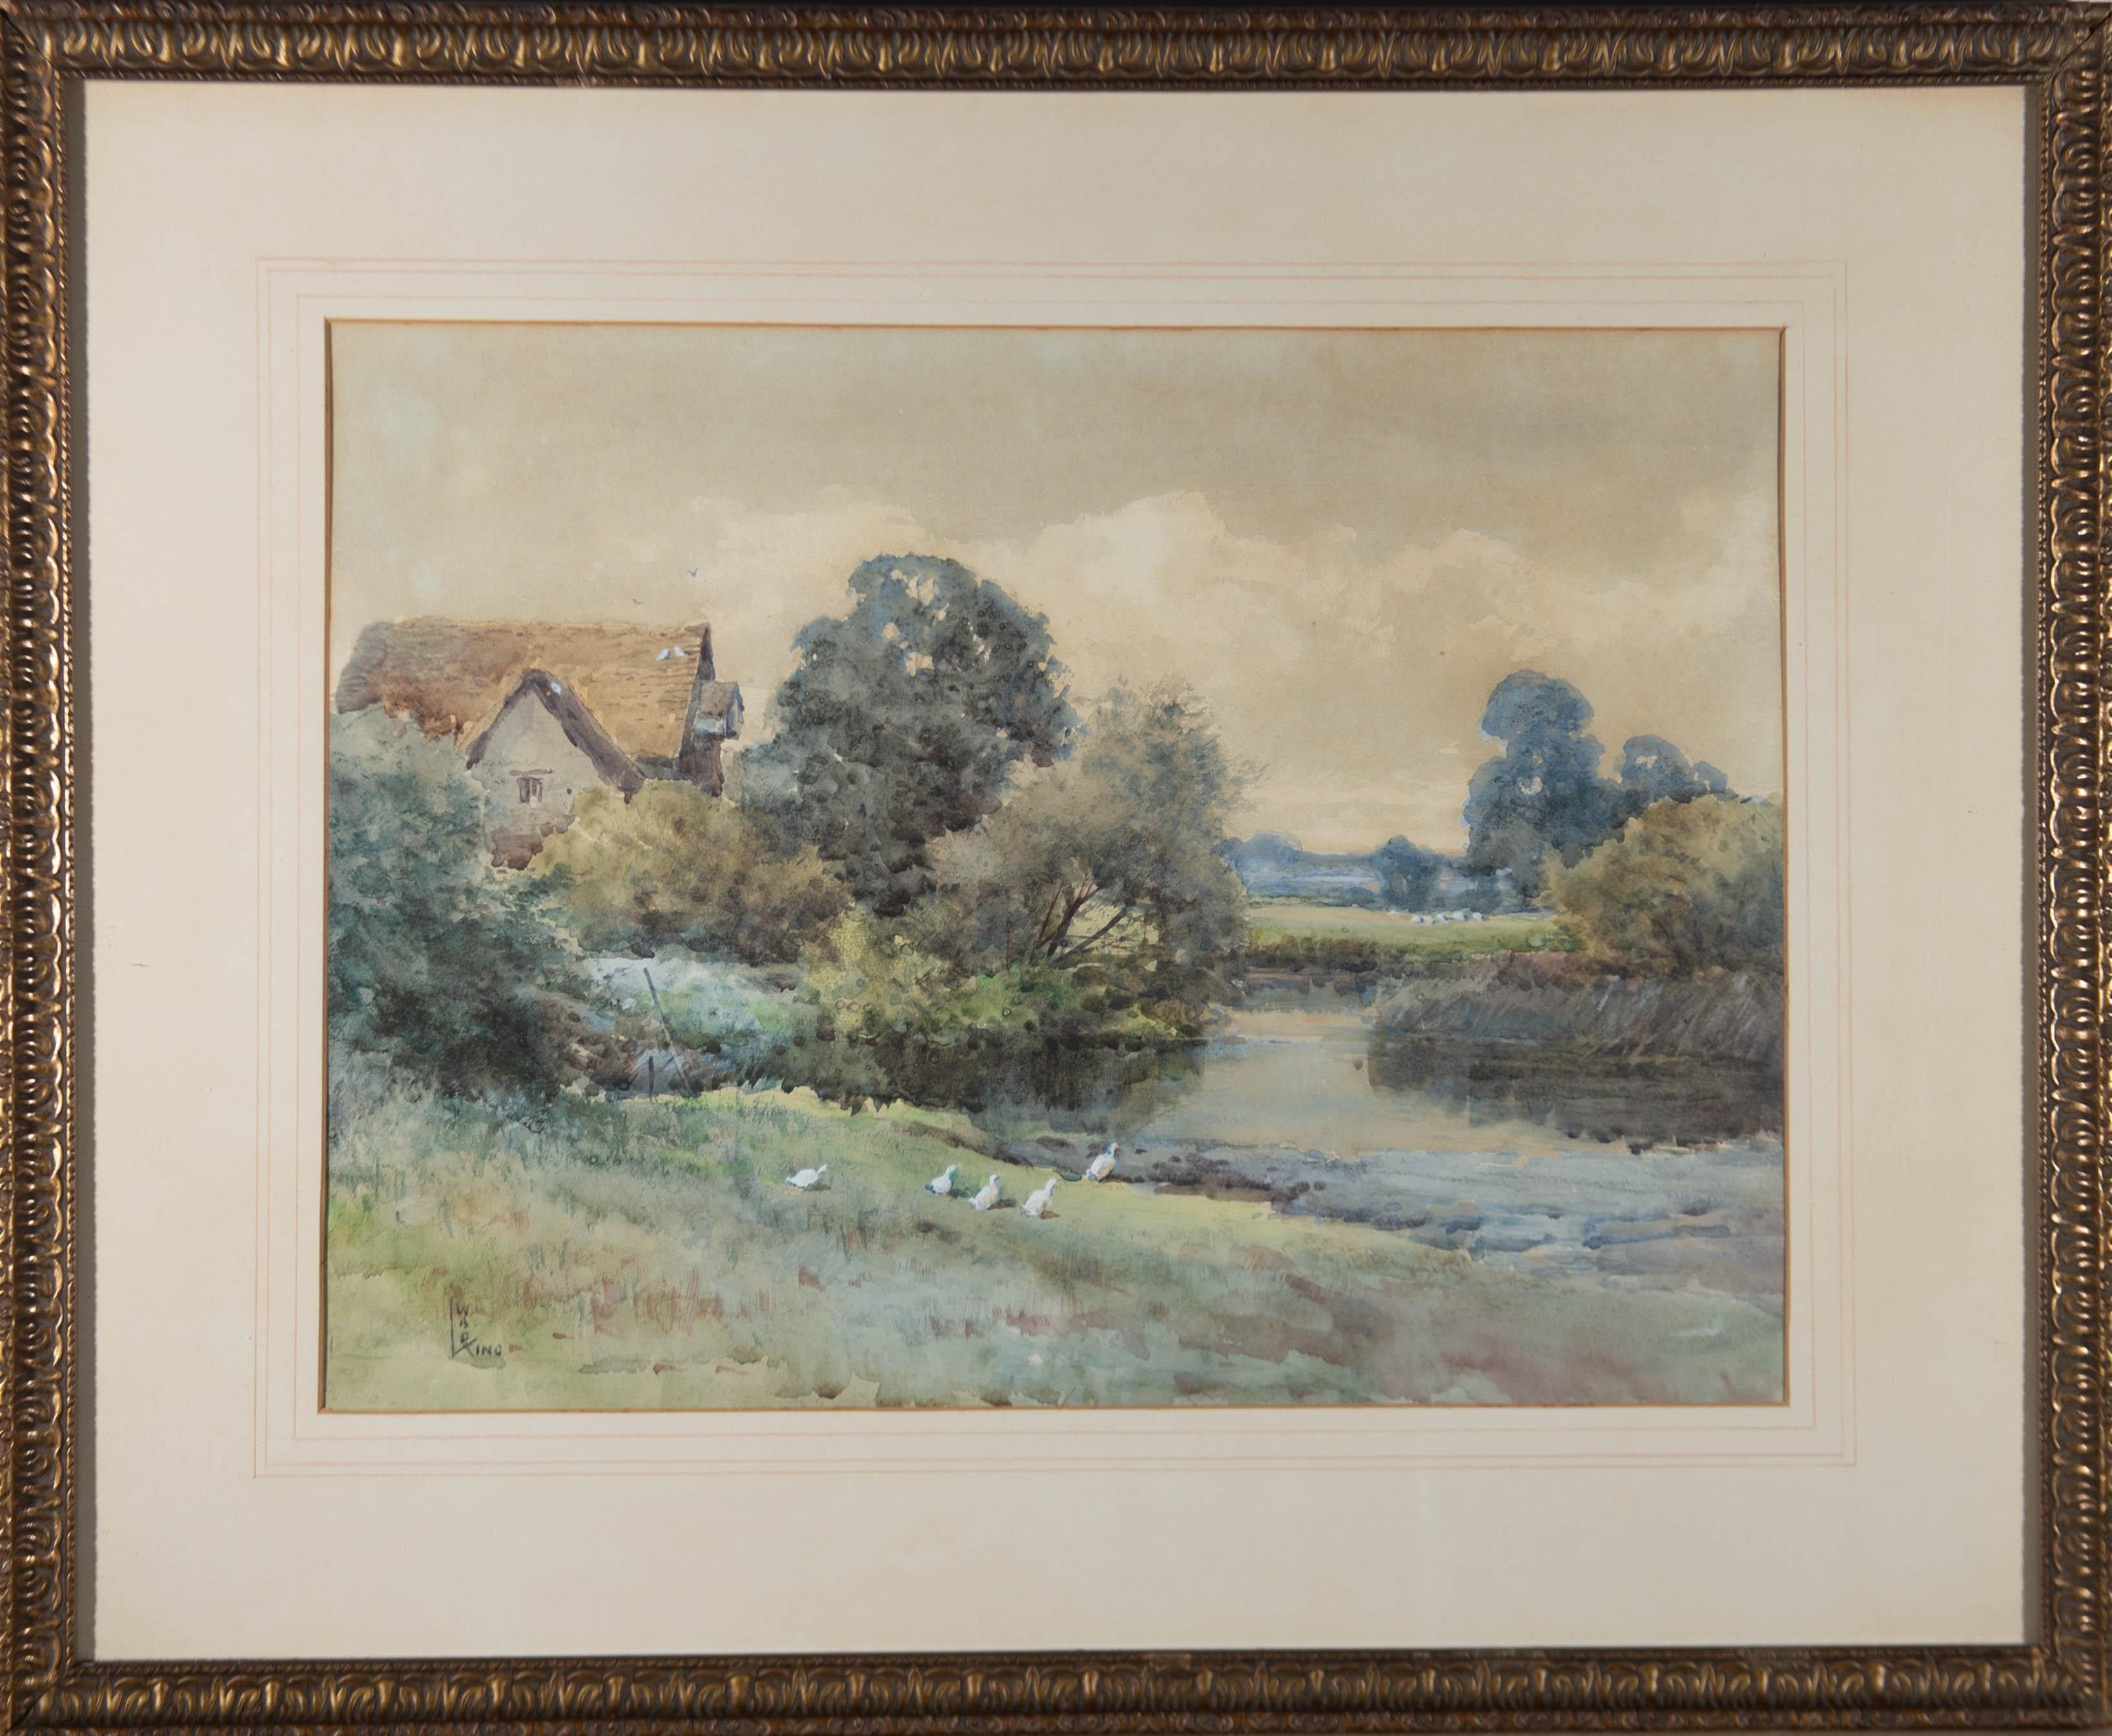 W.A.D. King - Early 20th Century Watercolour, Ducks by the River